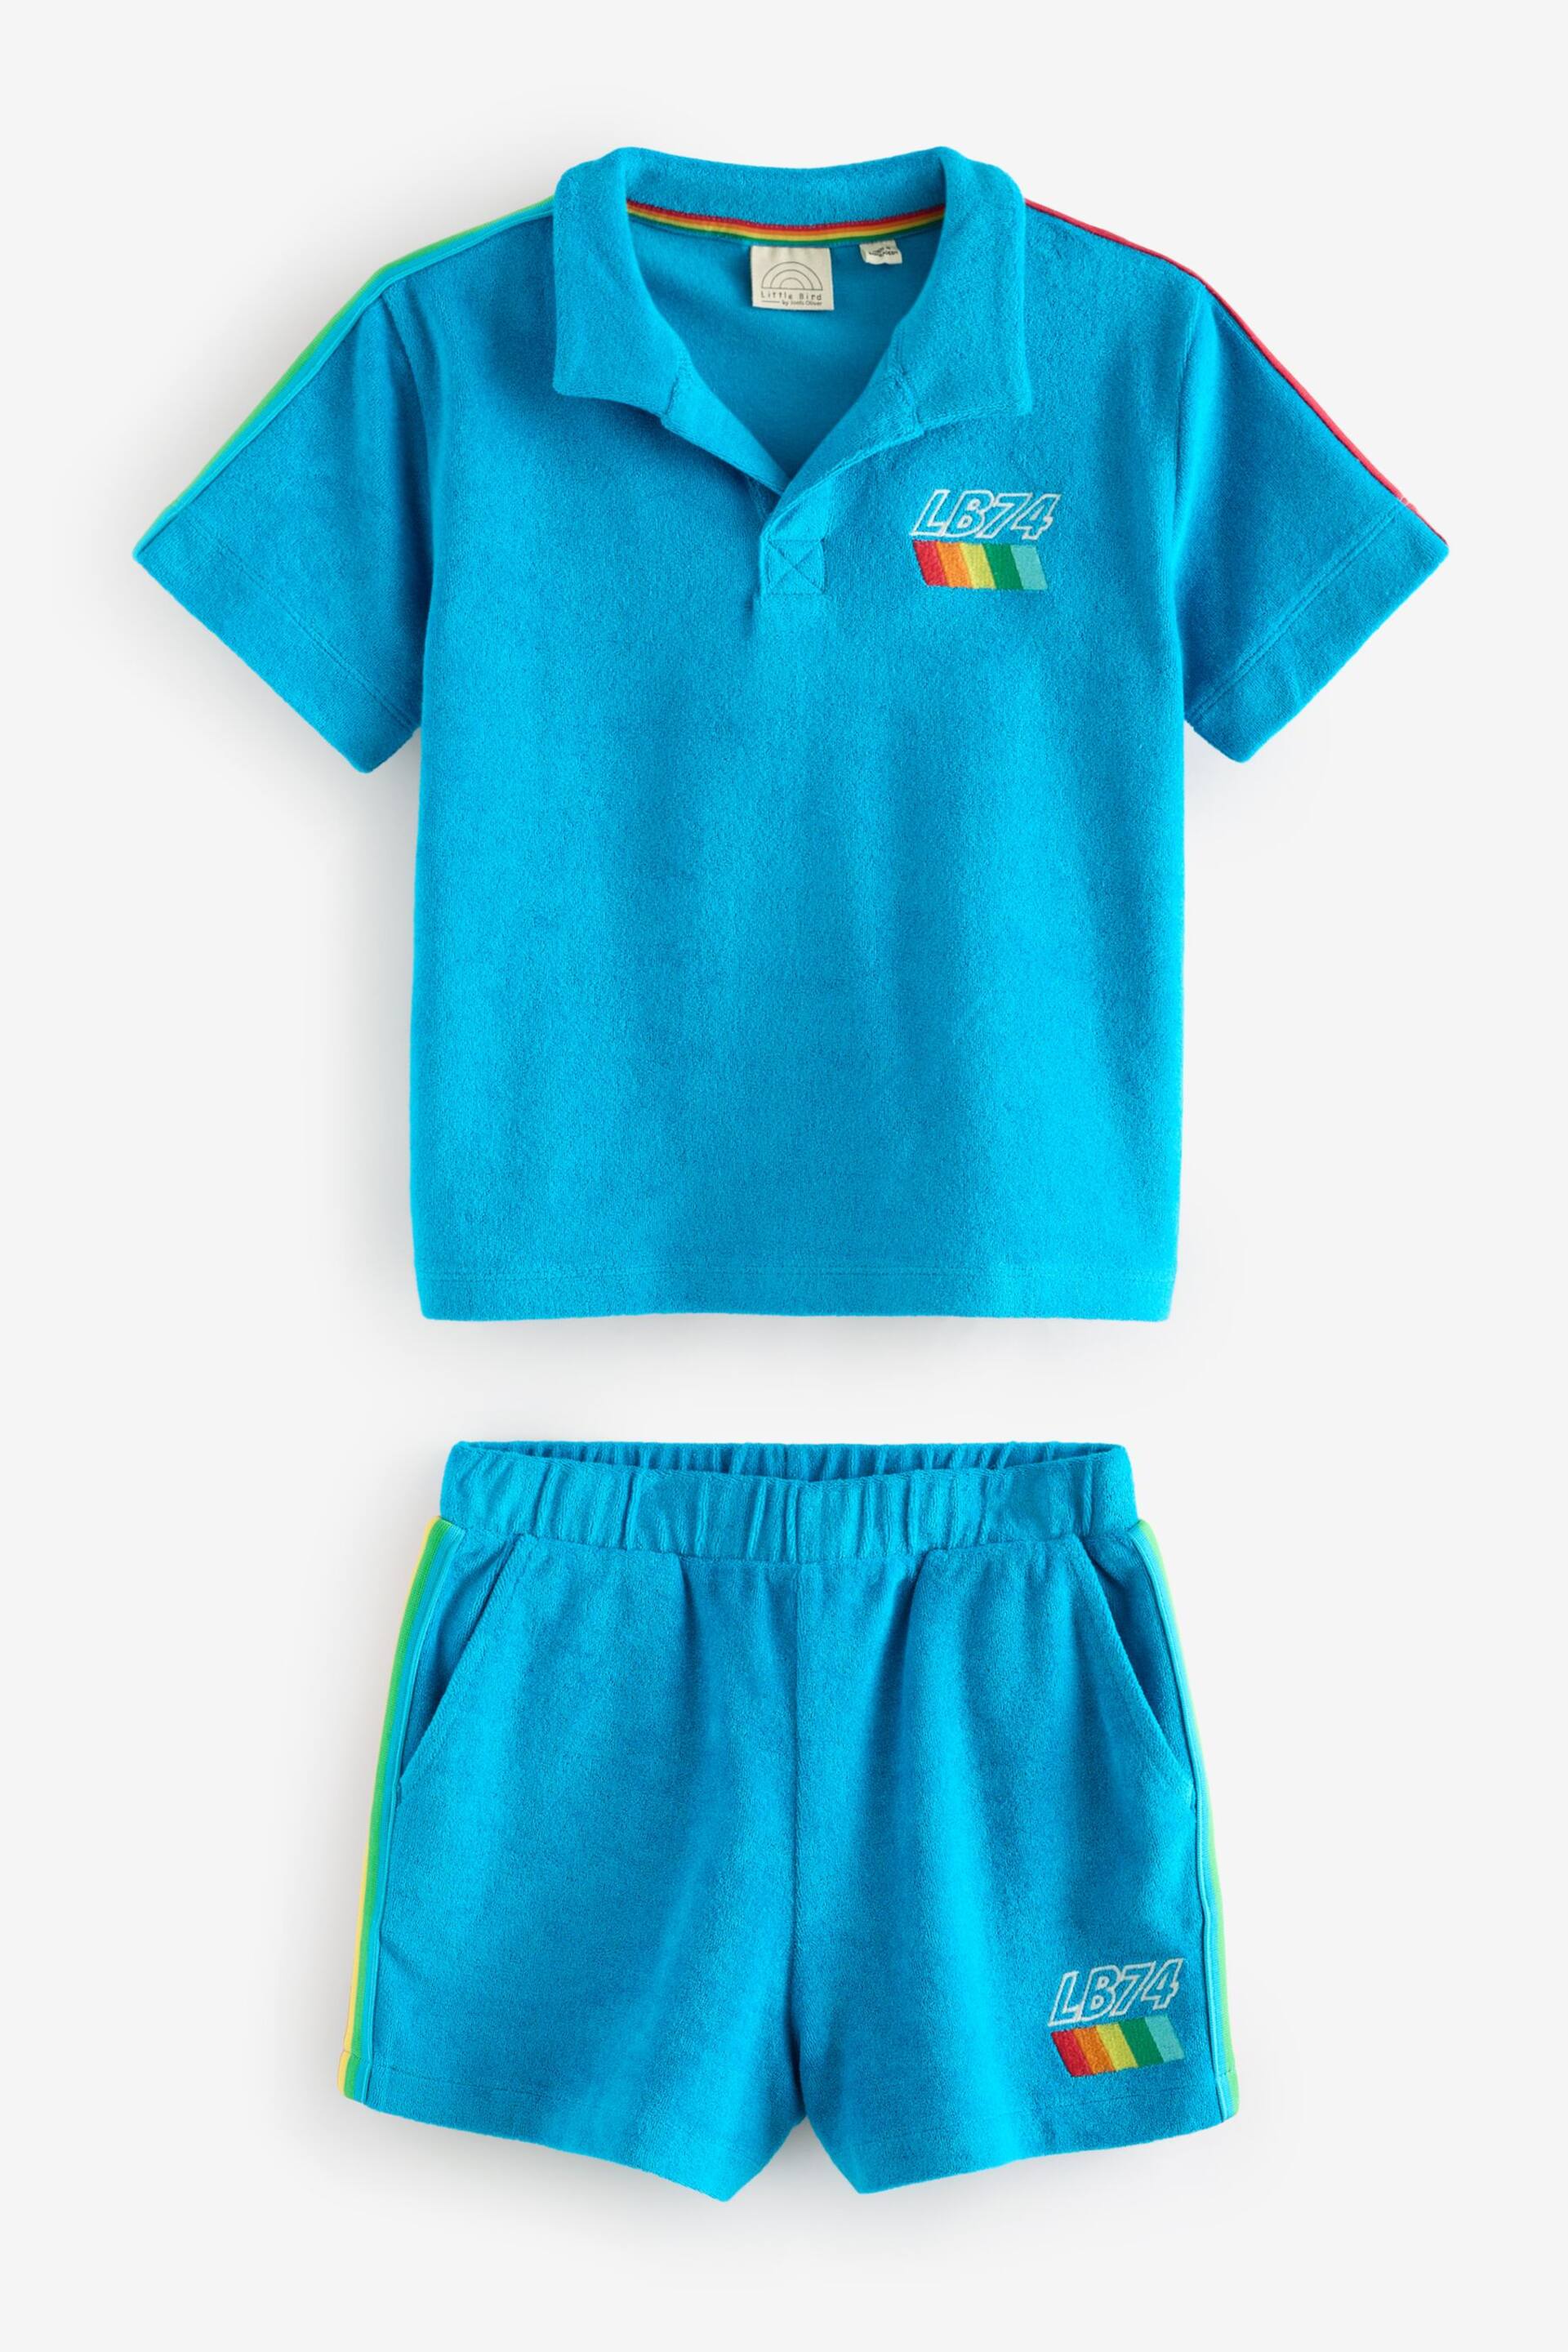 Little Bird by Jools Oliver Blue Towelling Polo Top and Shorts Set - Image 5 of 7